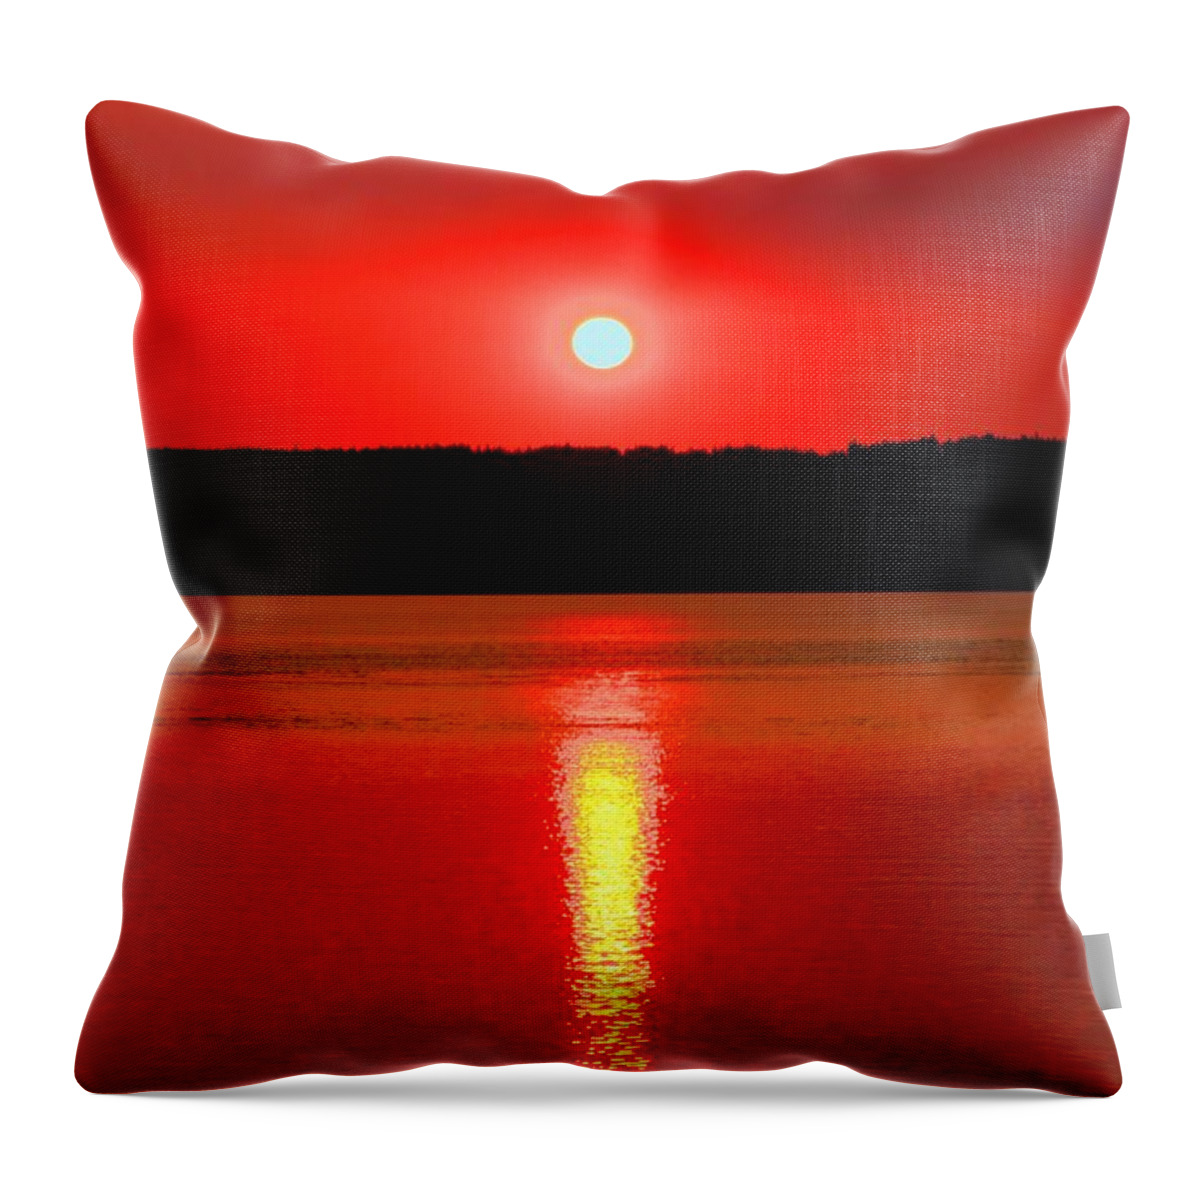 Water Throw Pillow featuring the photograph Sunrise Over Whidbey Island by Tap On Photo